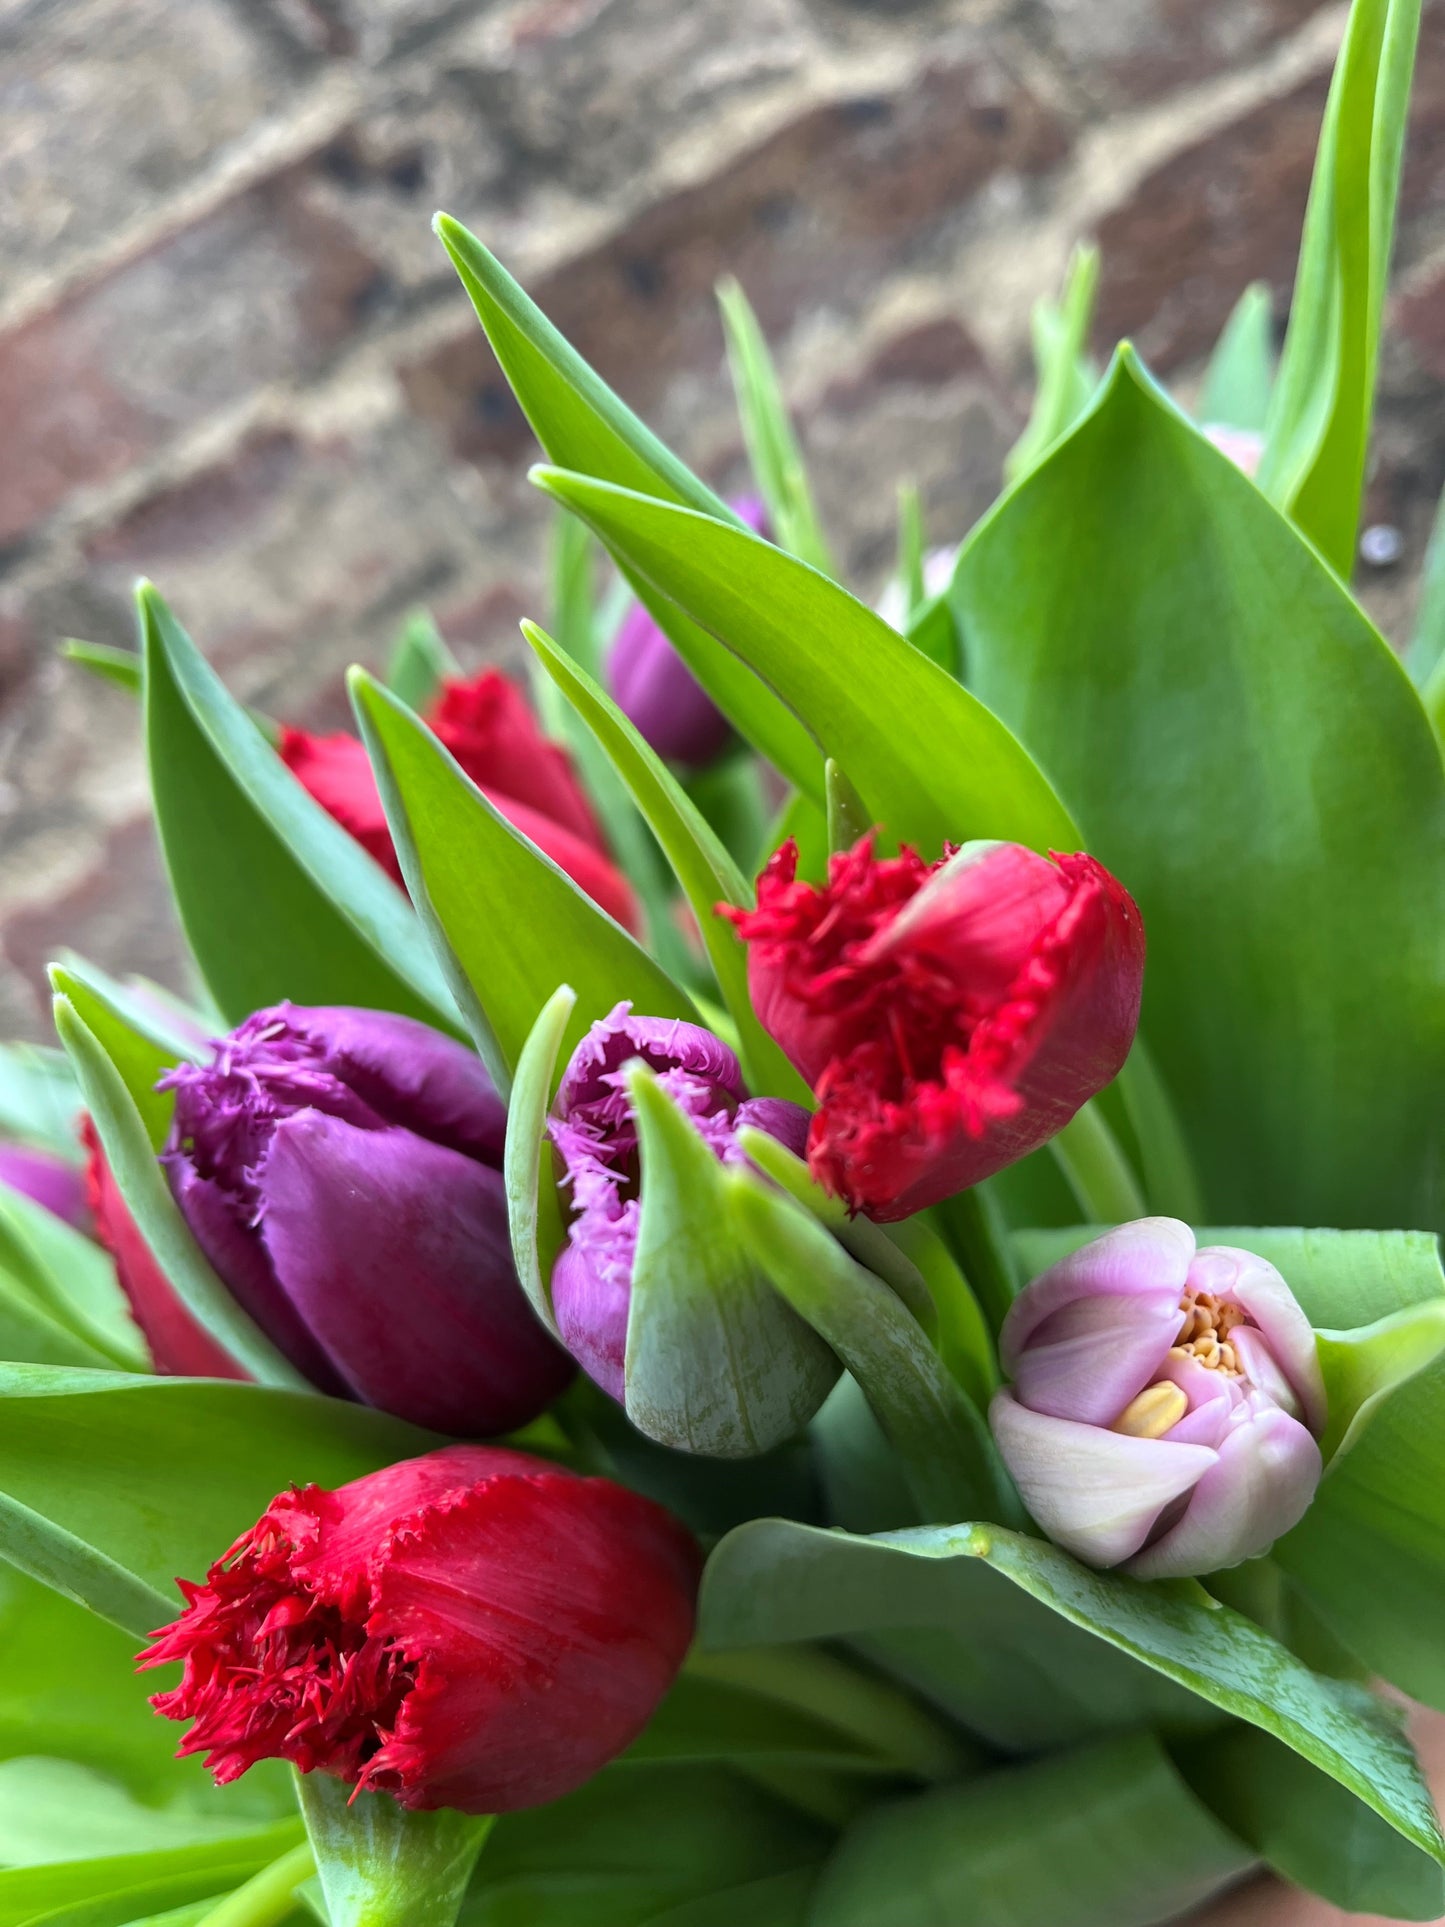 Our pick of the specialty Tulips